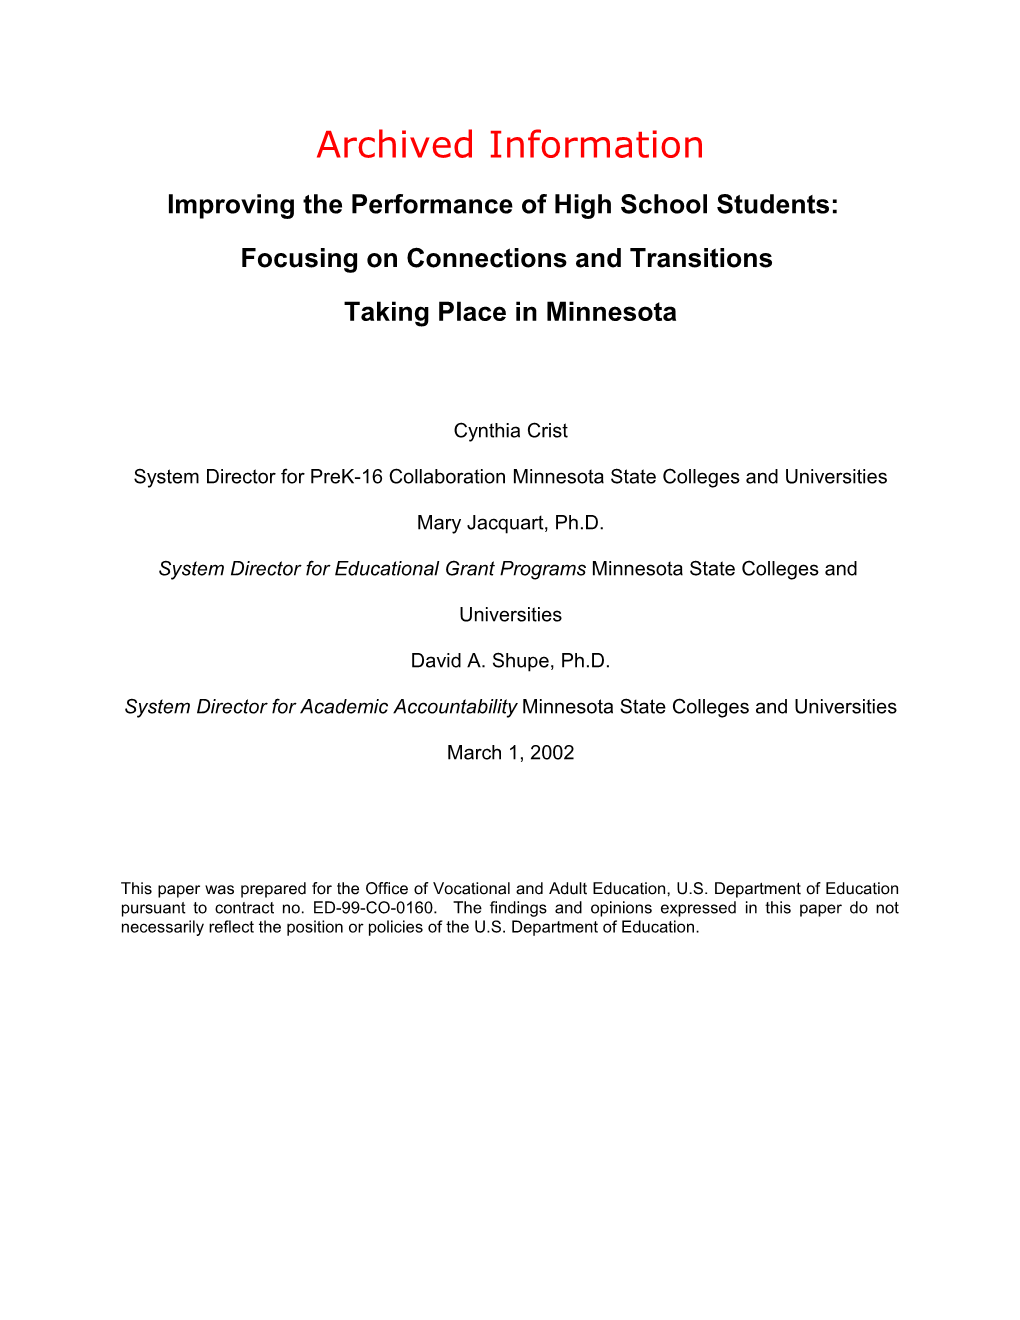 Archived: Improving the Performance of High School Students: Focusing on Connections And